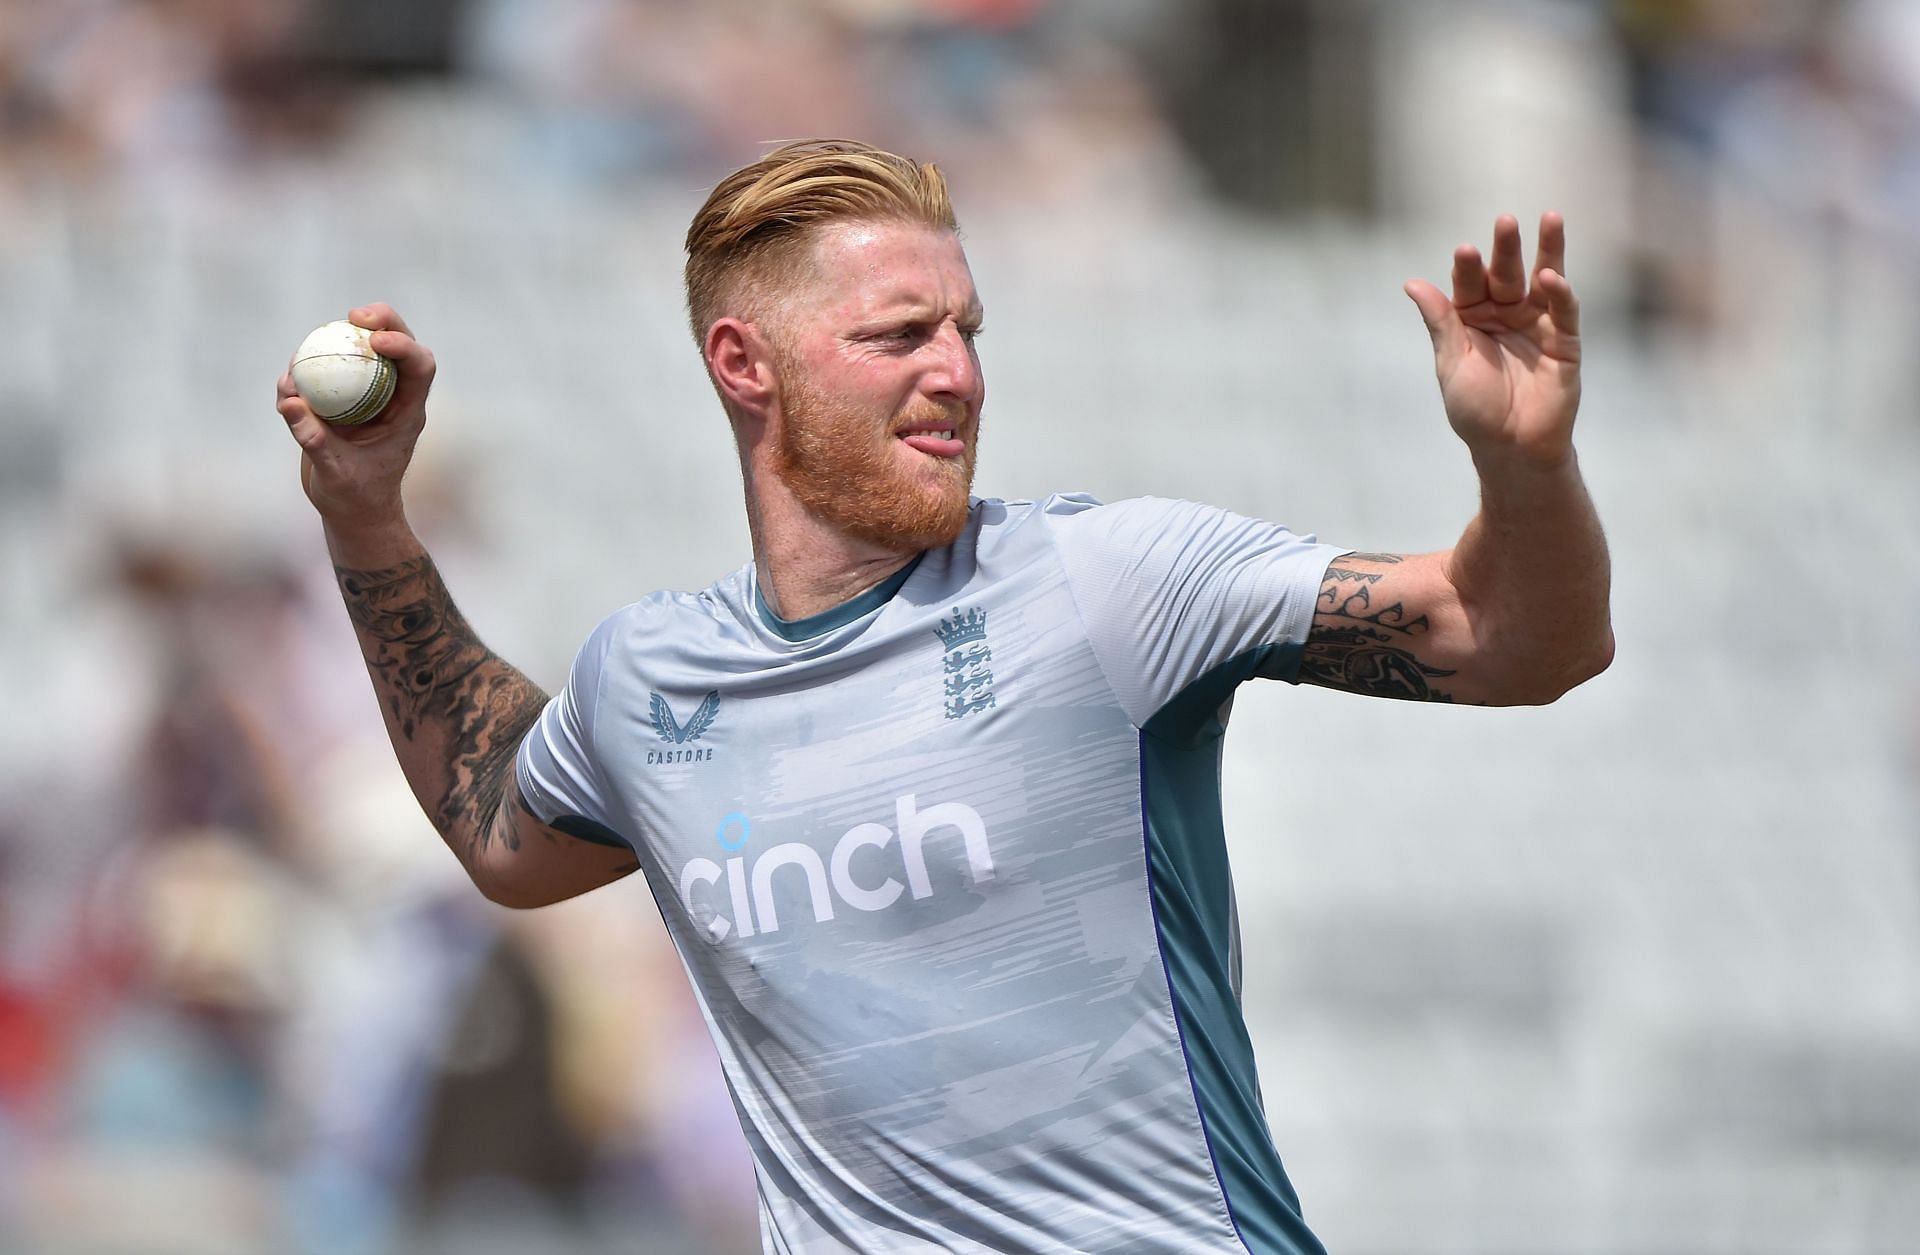 Ben Stokes warms up ahead of the 1st ODI against South Africa. (Pic: Getty Images)